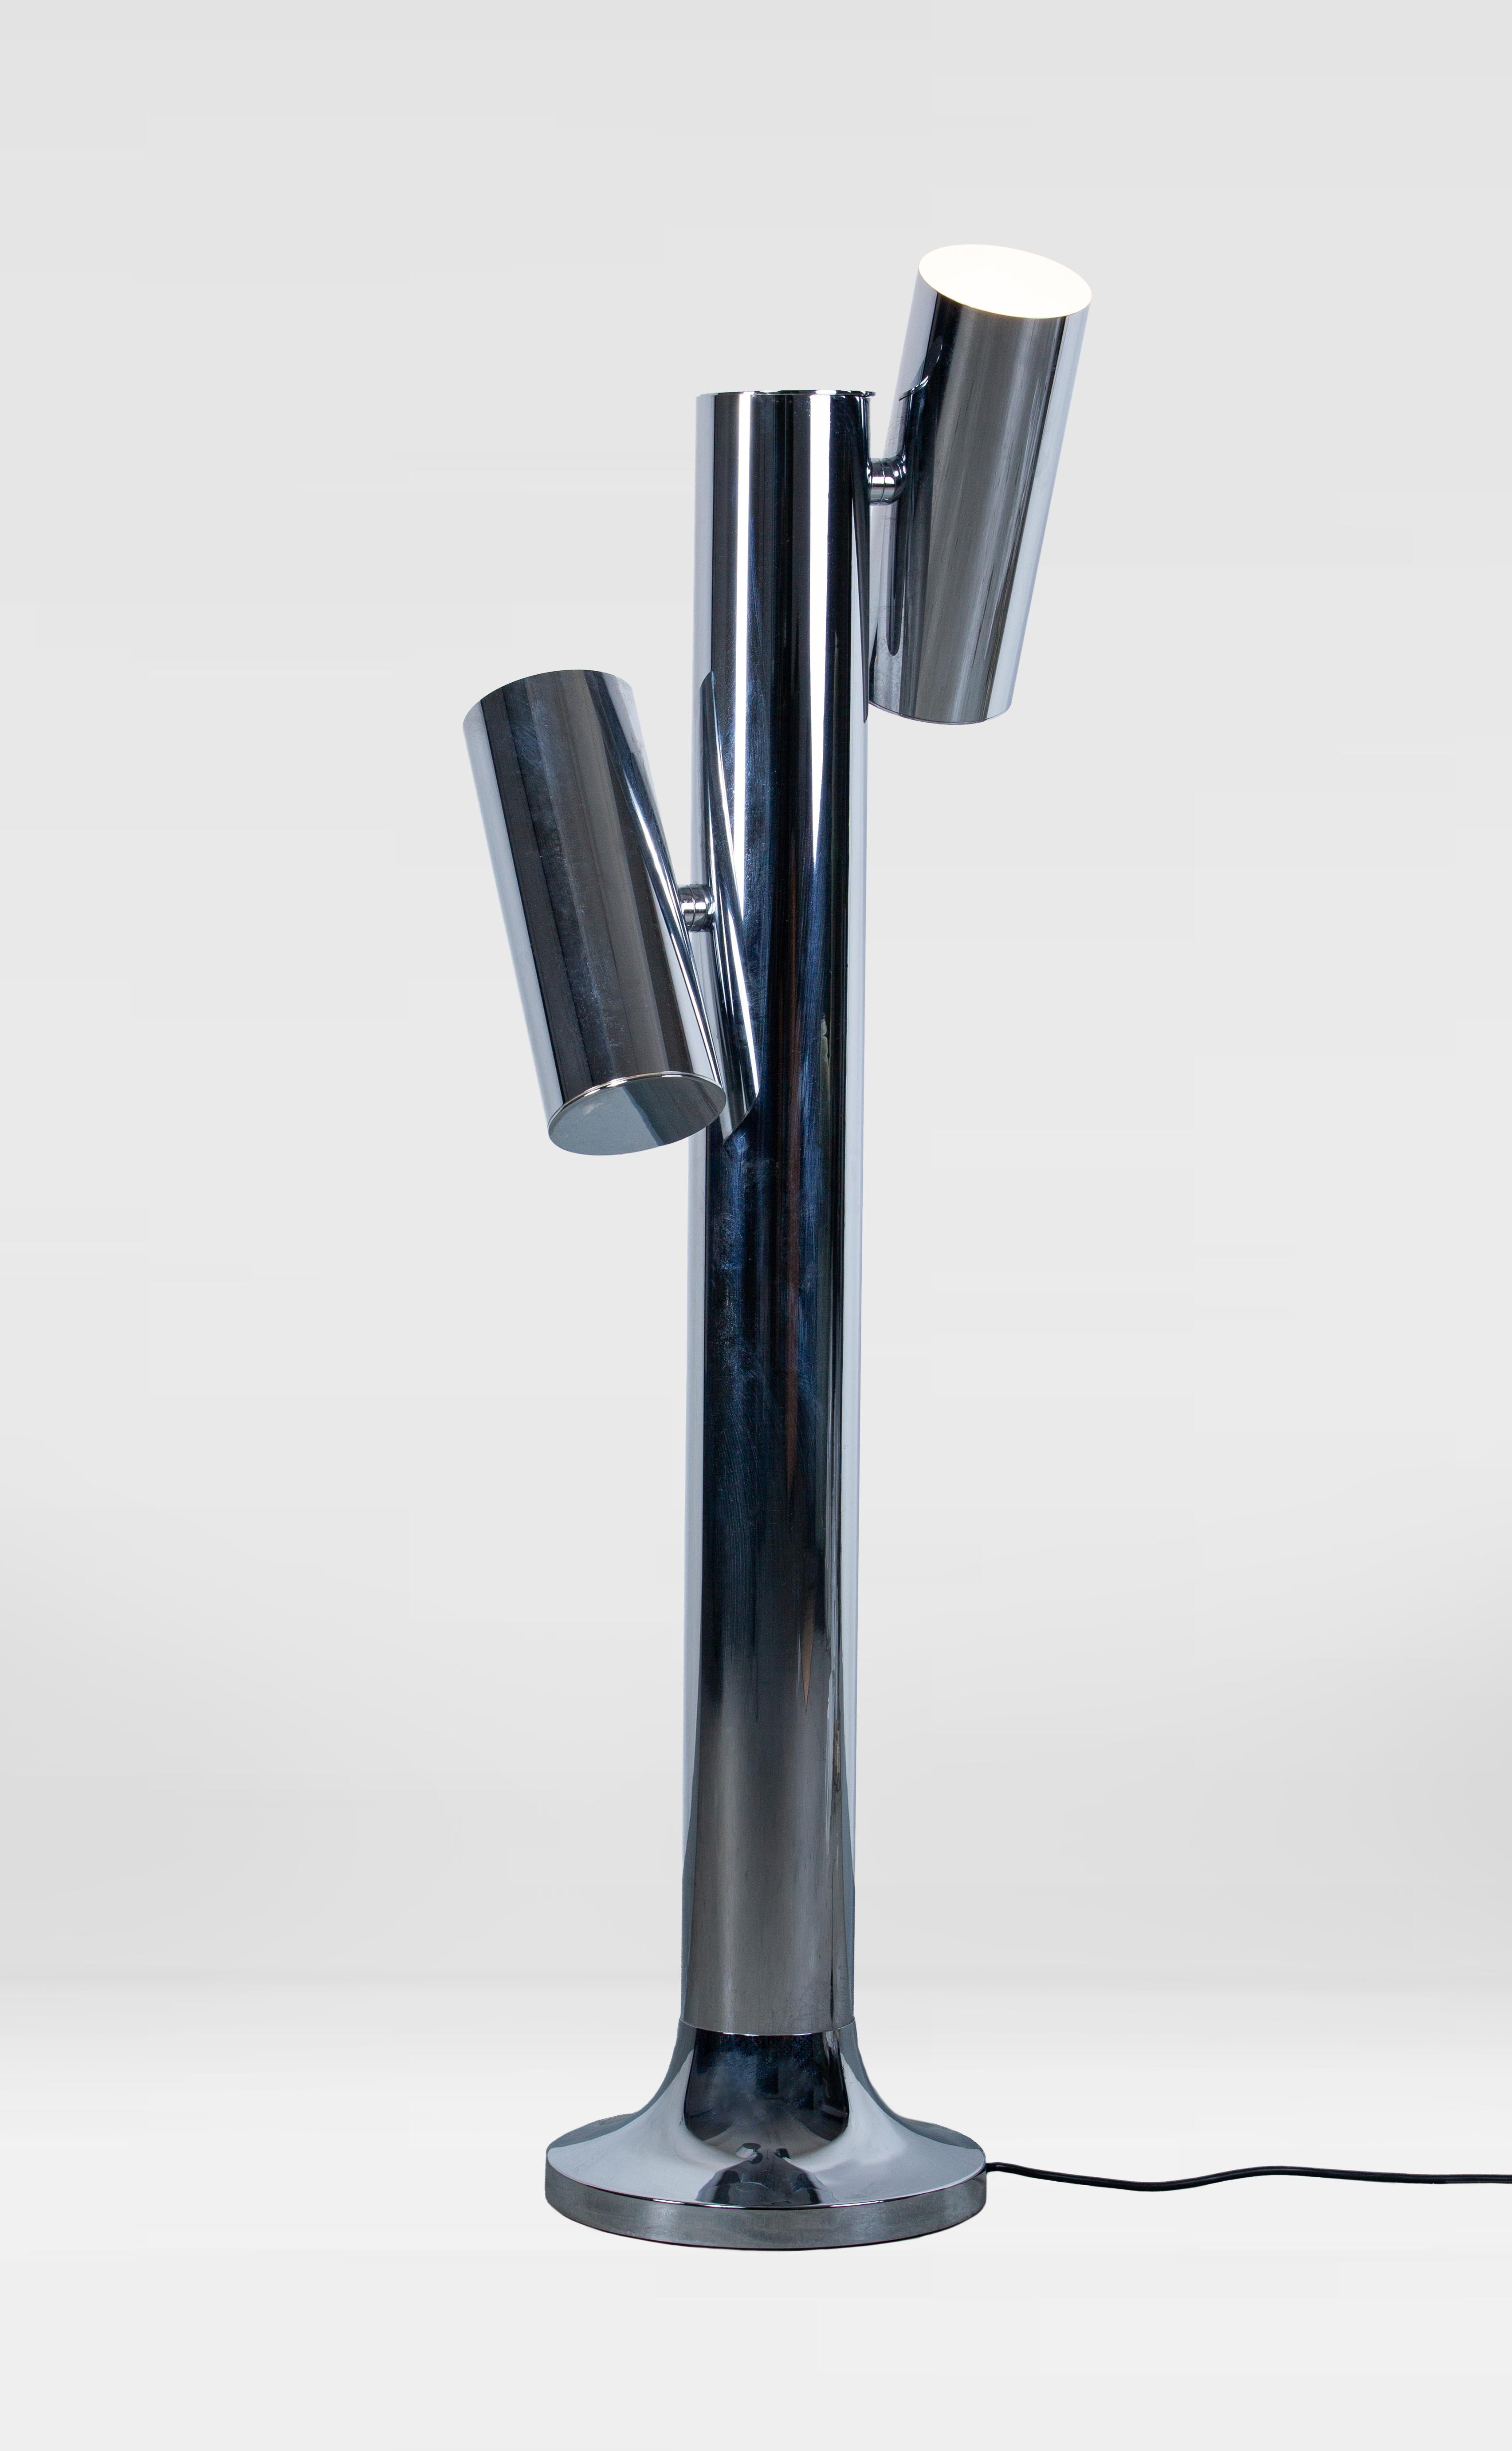 Floor lamp, Germany 1970s, stainless steel, adjustable light points.